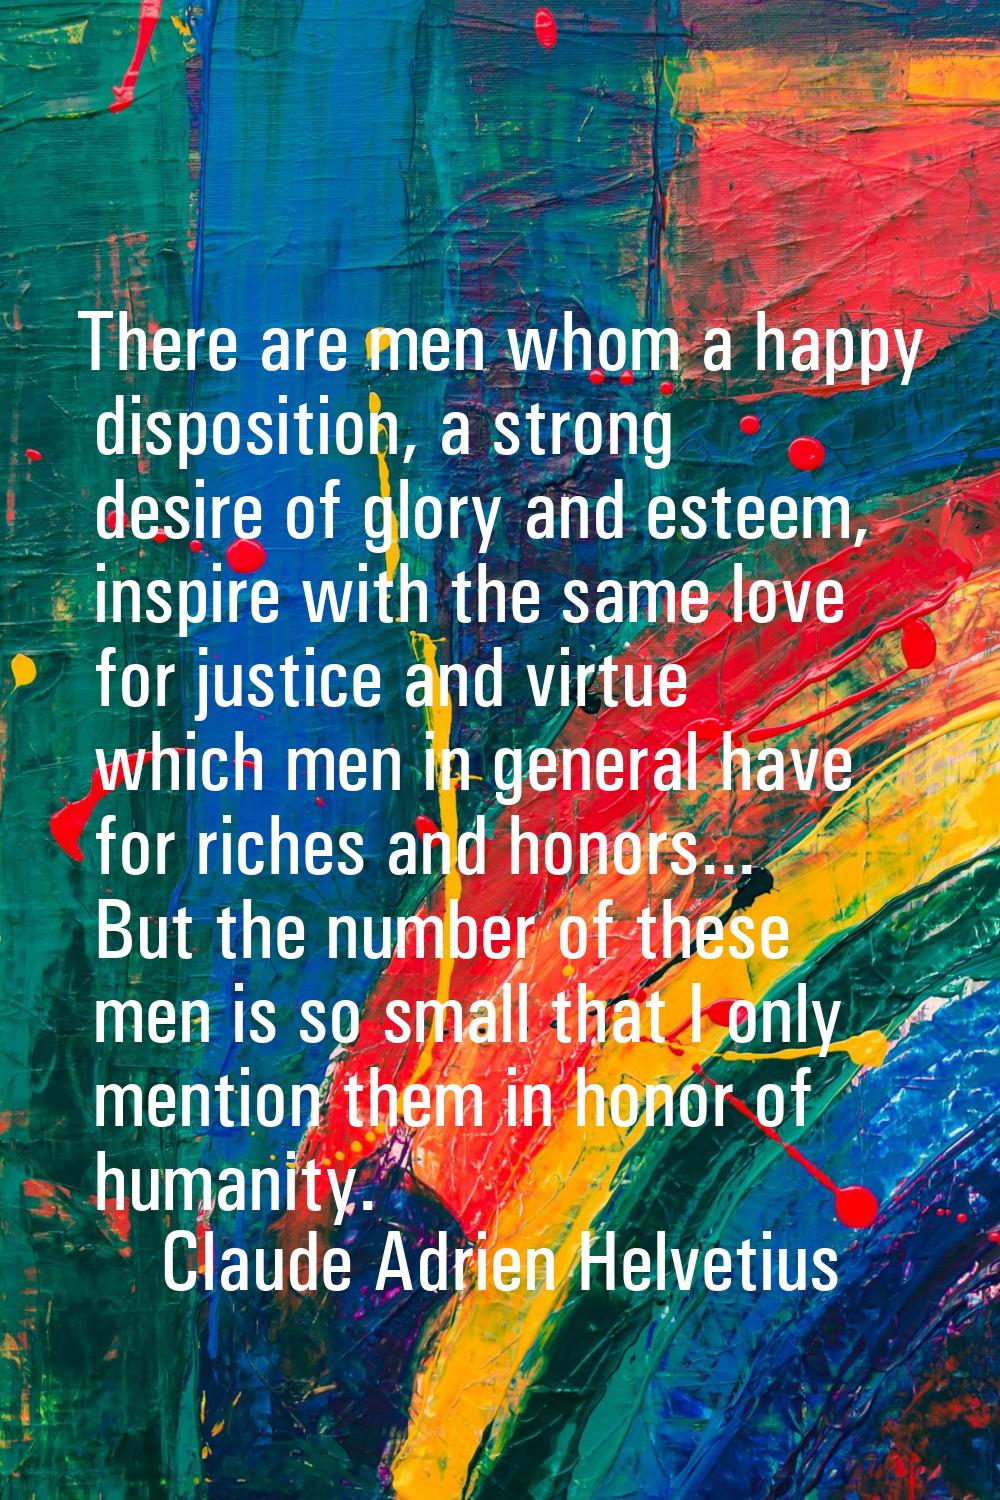 There are men whom a happy disposition, a strong desire of glory and esteem, inspire with the same 